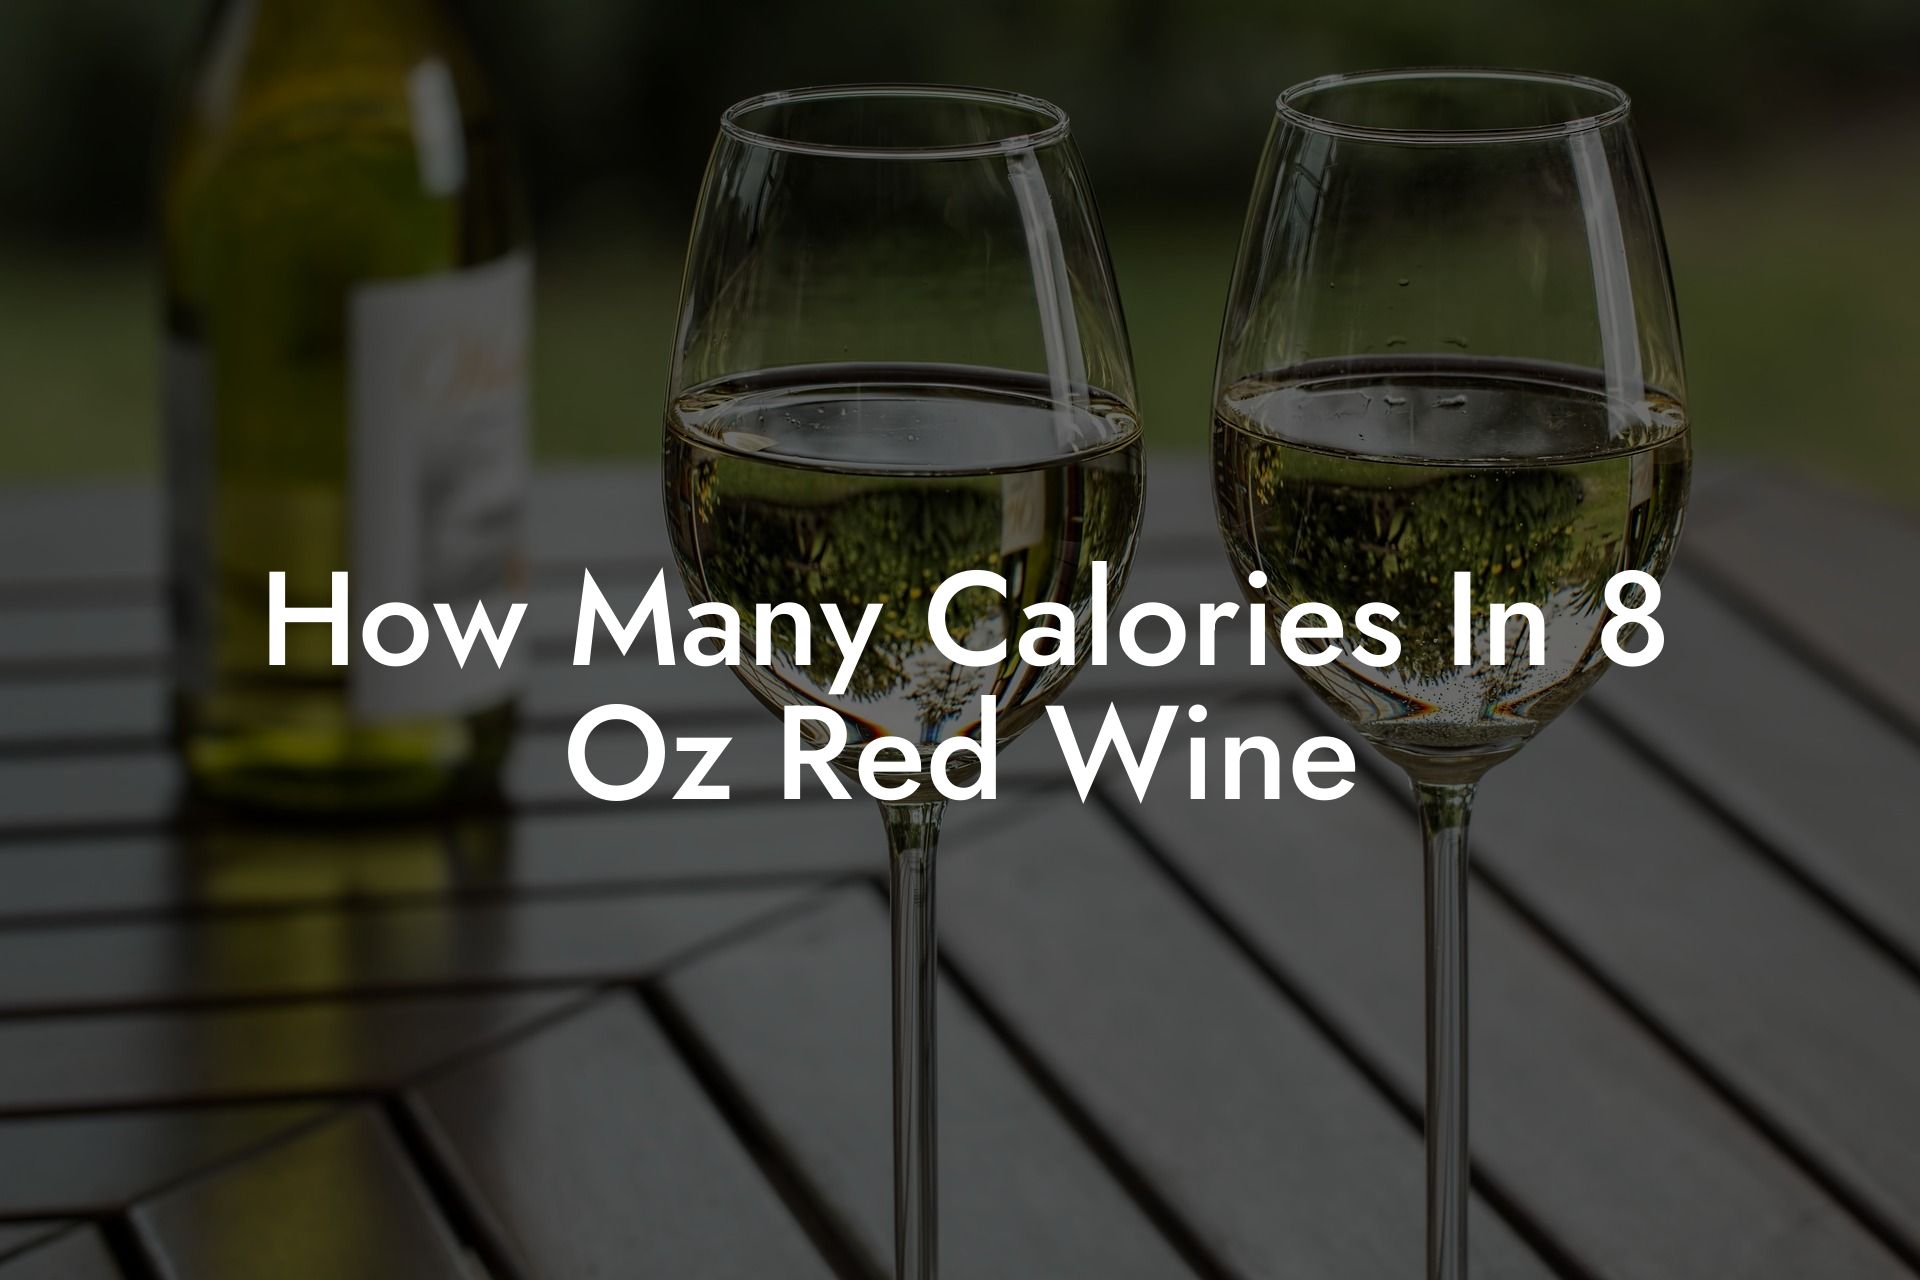 How Many Calories In 8 Oz Red Wine